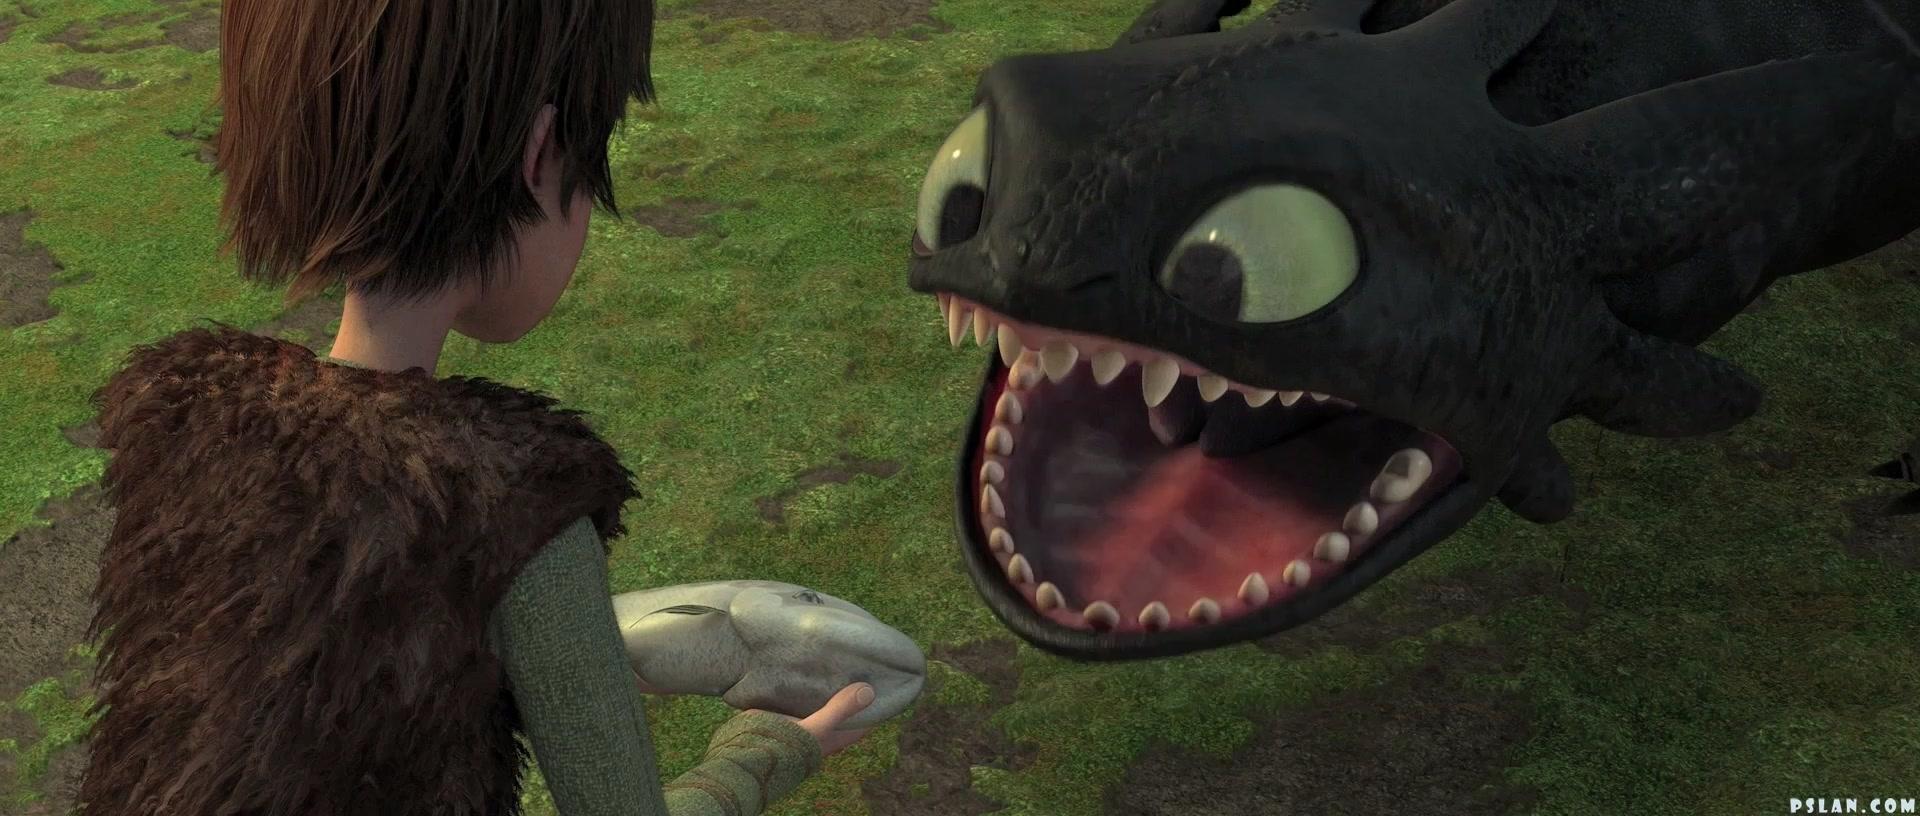 http://images2.fanpop.com/image/photos/9600000/Hiccup-Toothless-how-to-train-your-dragon-9626254-1920-816.jpg